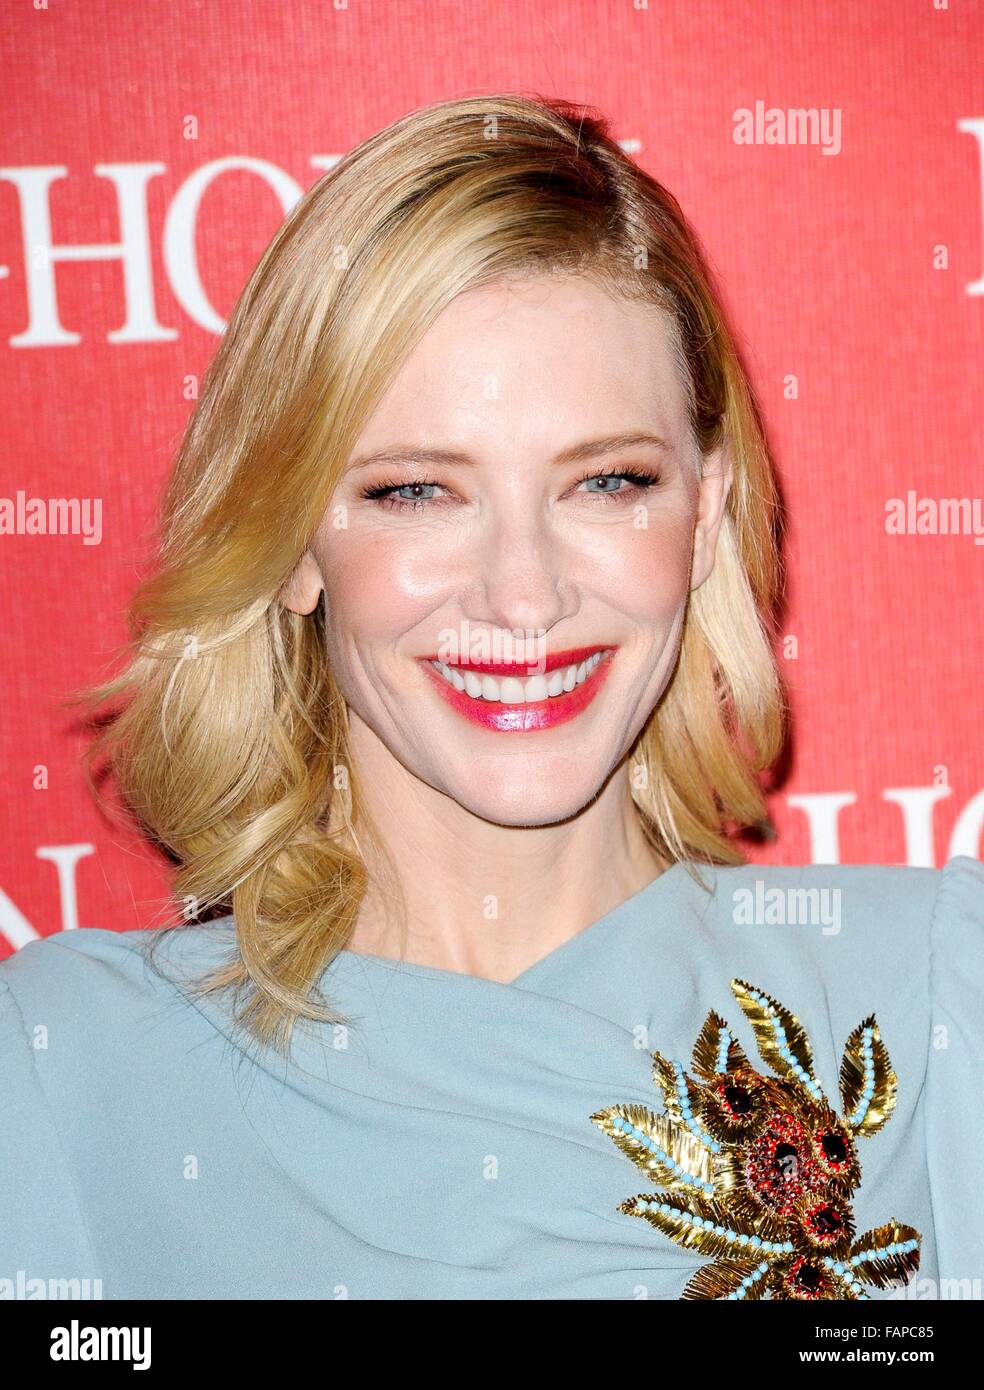 Cate Blanchett at arrivals for The 27th Annual Palm Springs International Film Festival Awards Show, Palm Springs Convention Center, Palm Springs, CA January 2, 2016. Photo By: Elizabeth Goodenough/Everett Collection Stock Photo